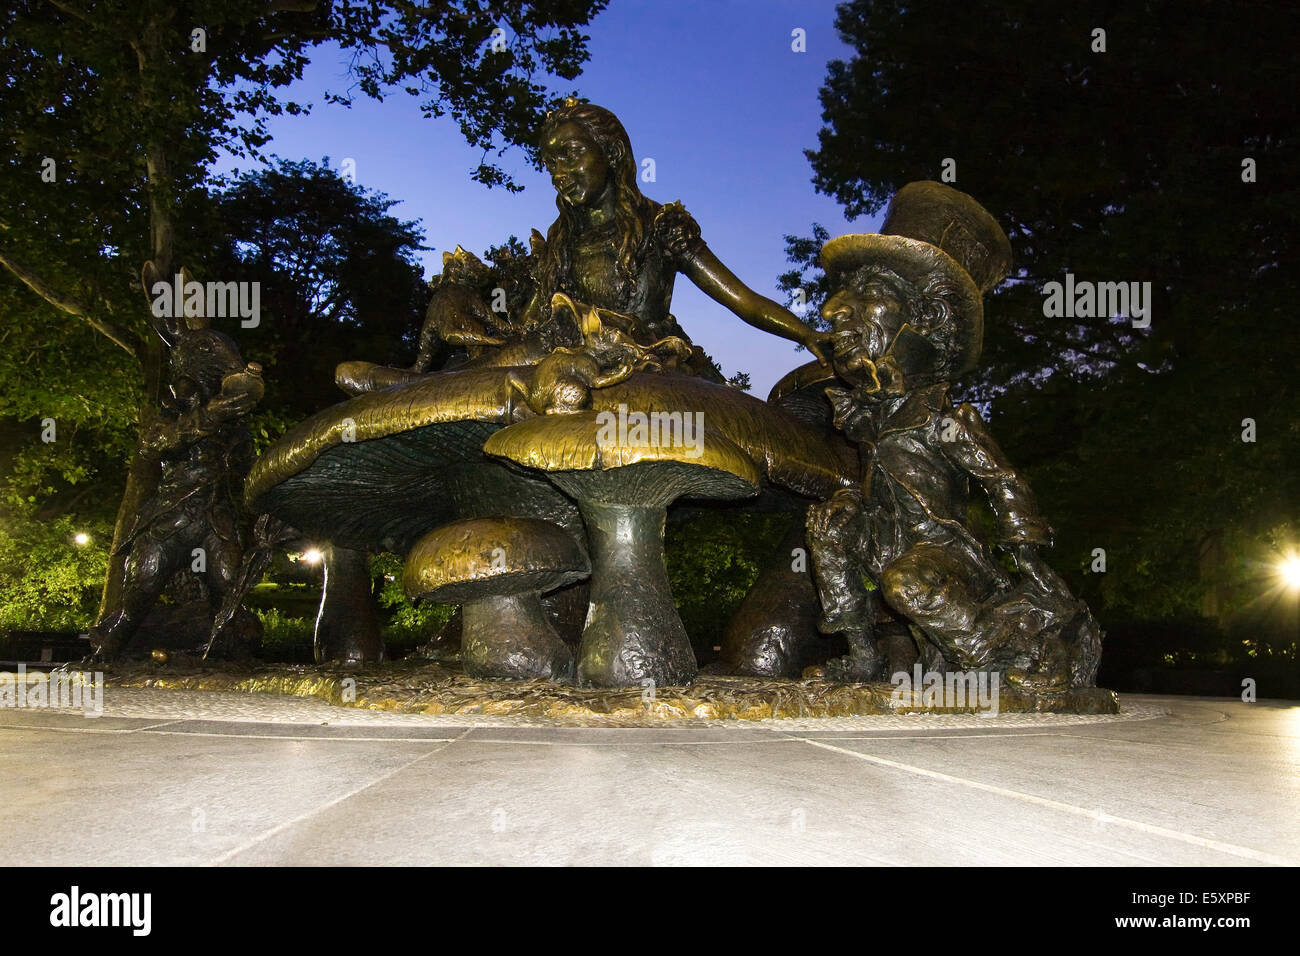 Alice in Wonderland Statue at night in NYC's Central Park sculpted by José de Creeft and commissioned by George Delacorte Stock Photo